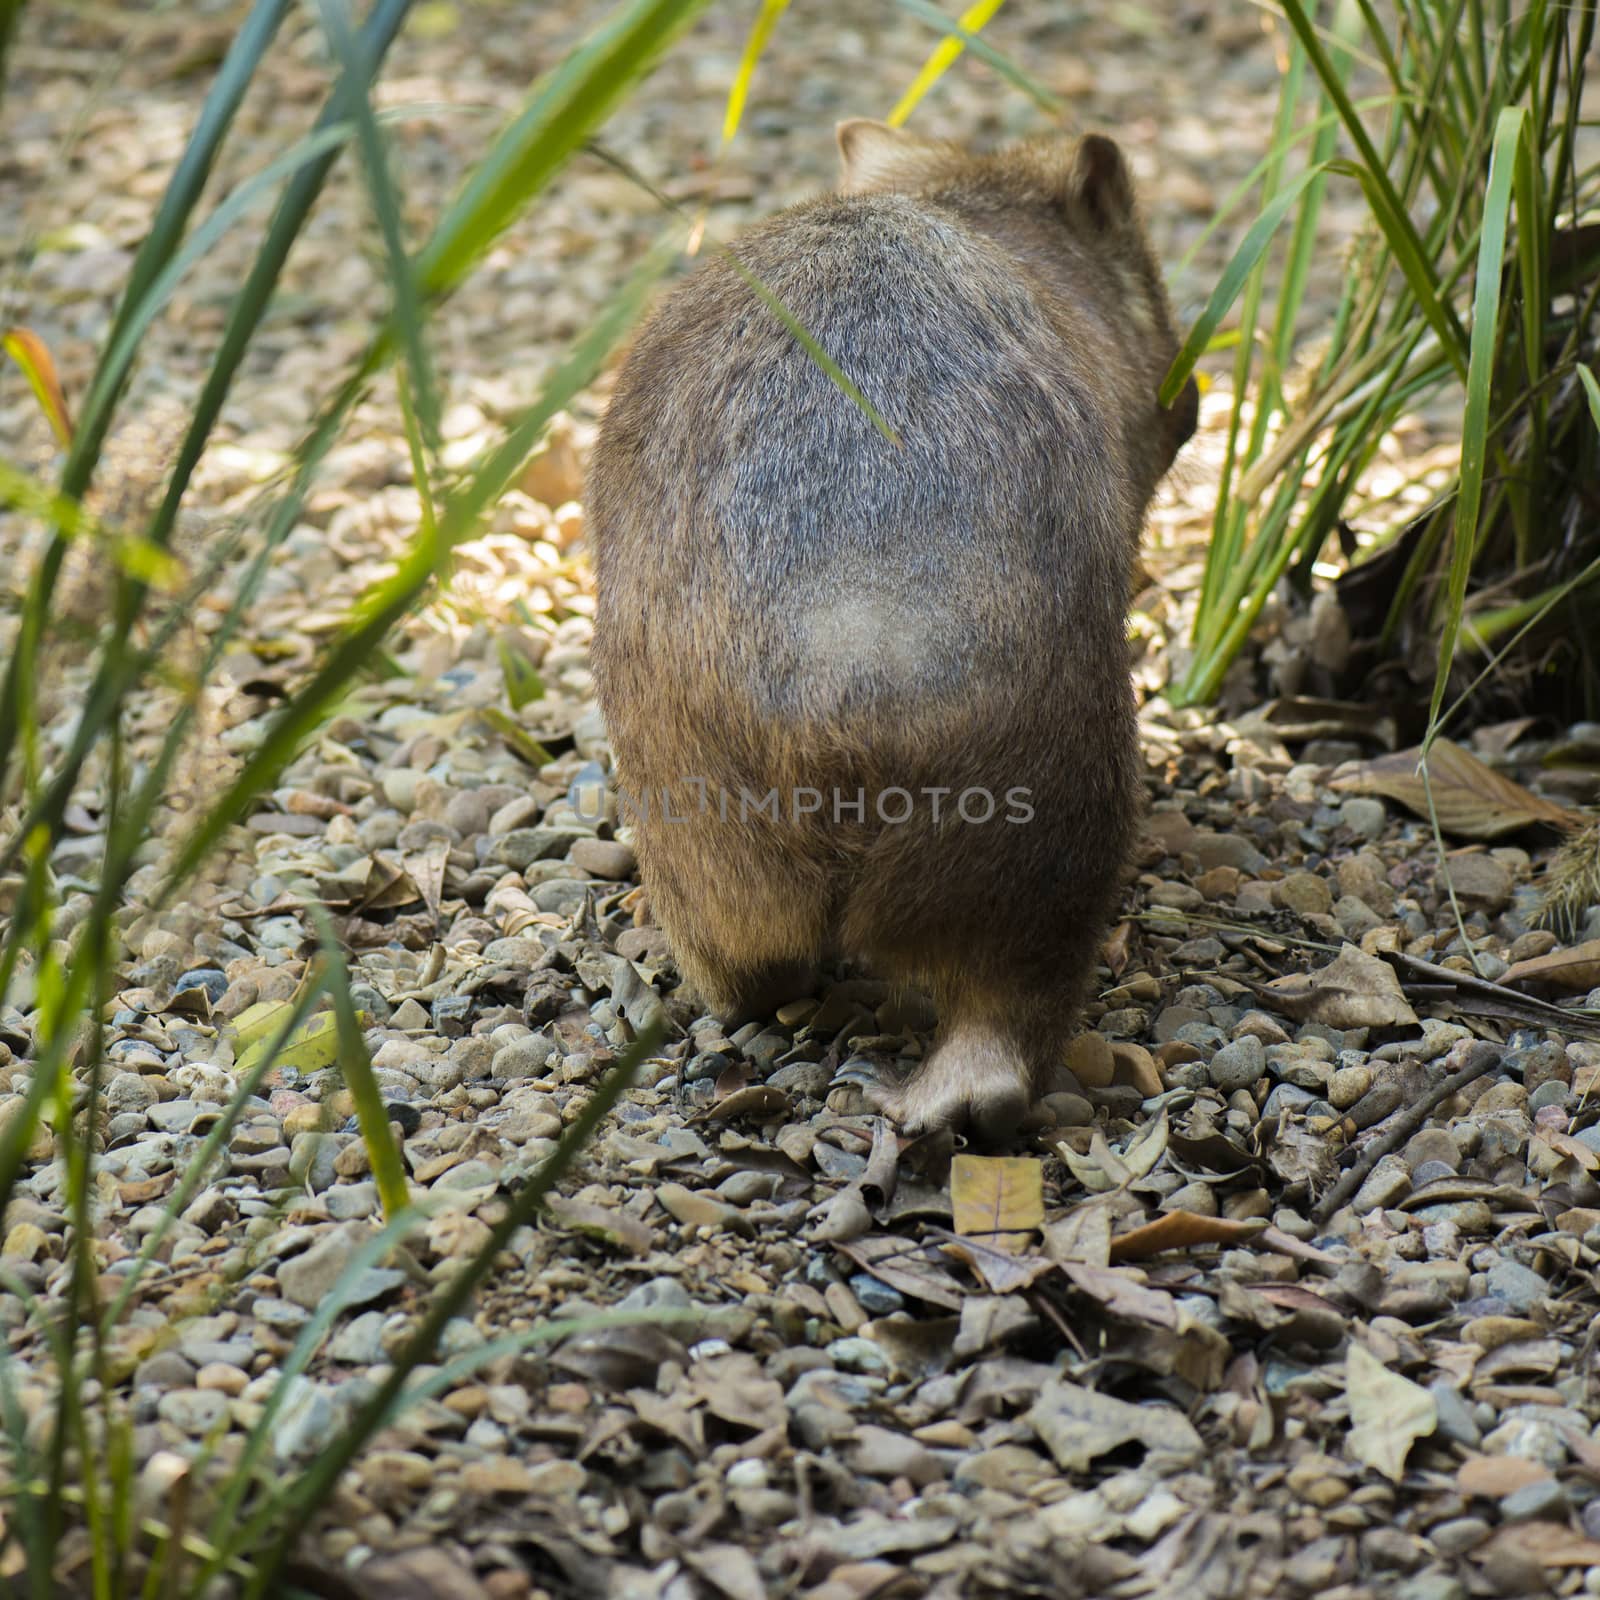 Large adorable wombat during the day looking for grass to eat.